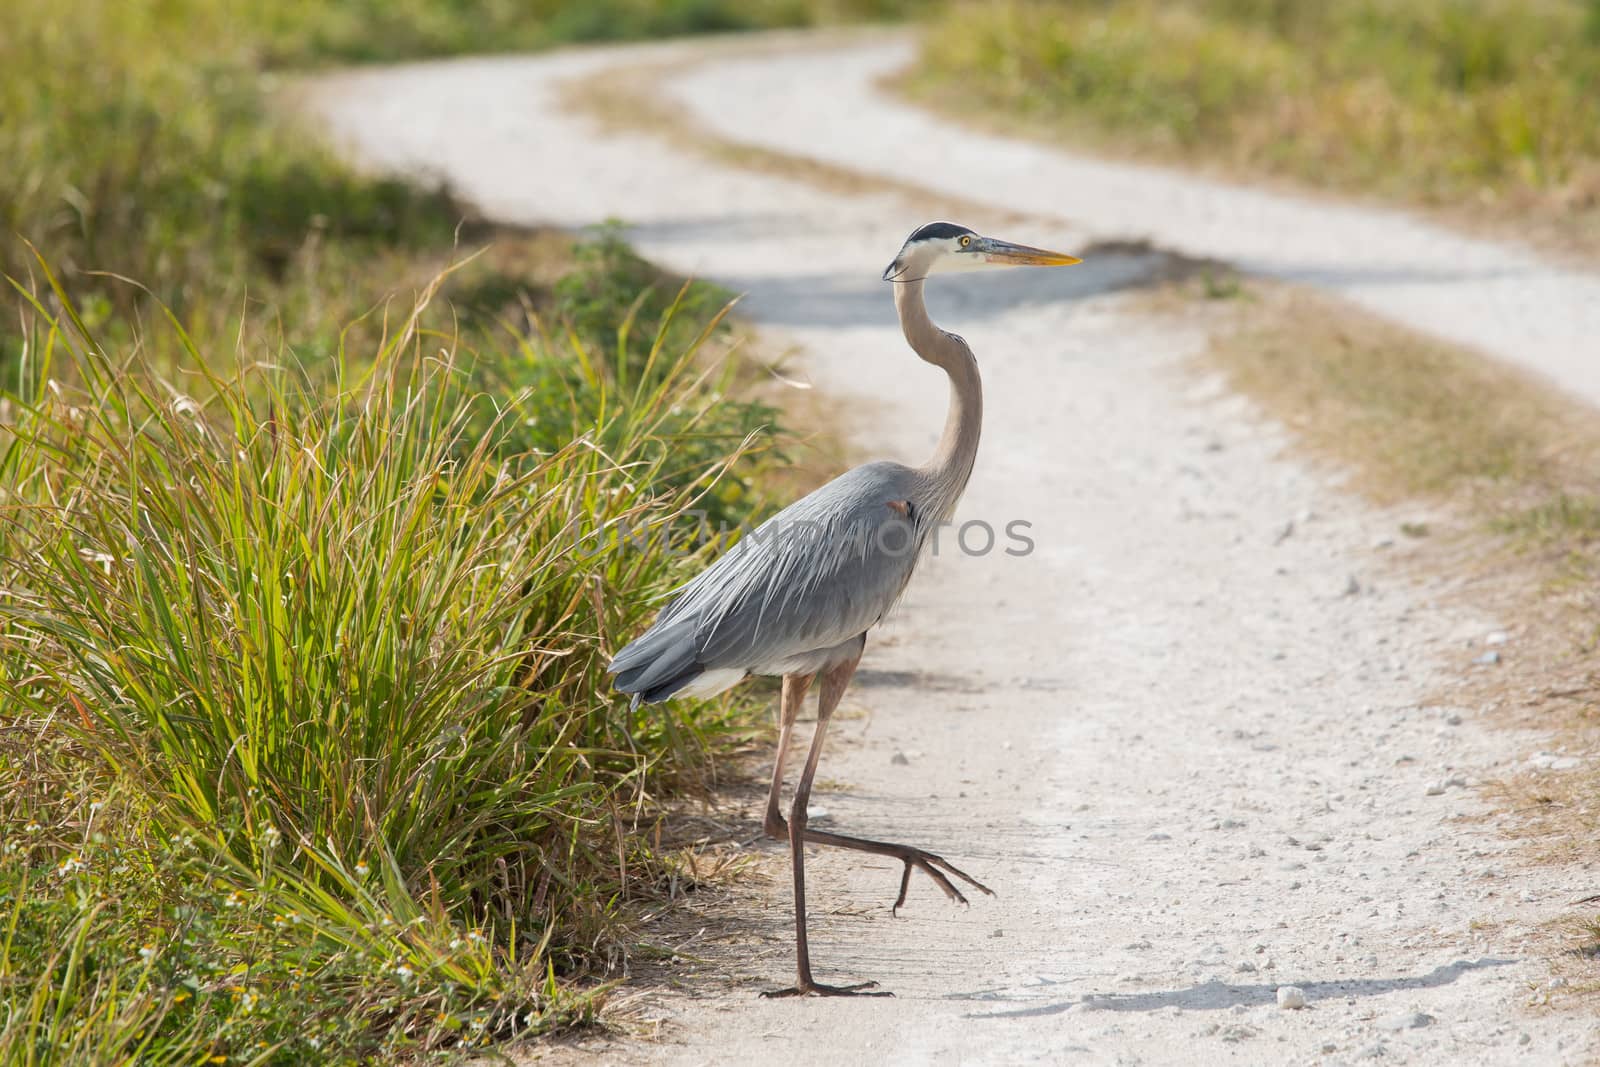 Why'd the Heron Cross the Road by picturyay